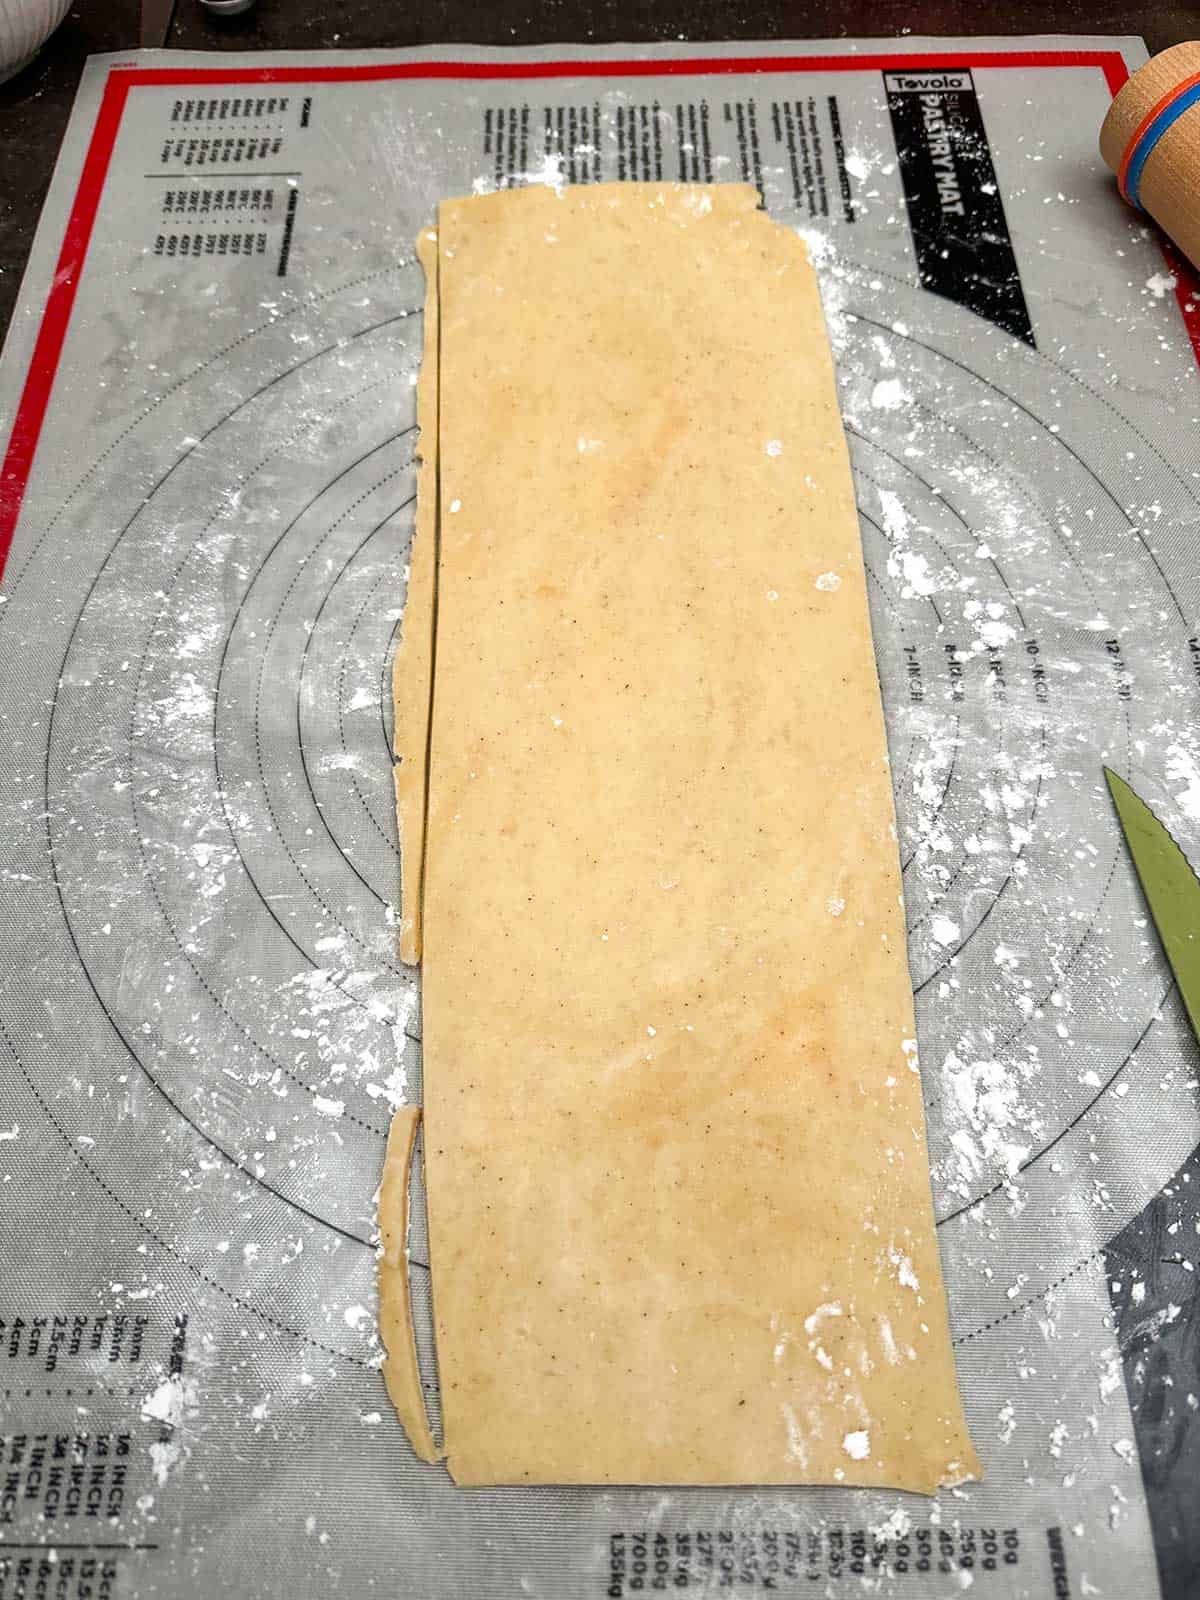 Making the sides of the cookie dough roll by slicing off the excess.